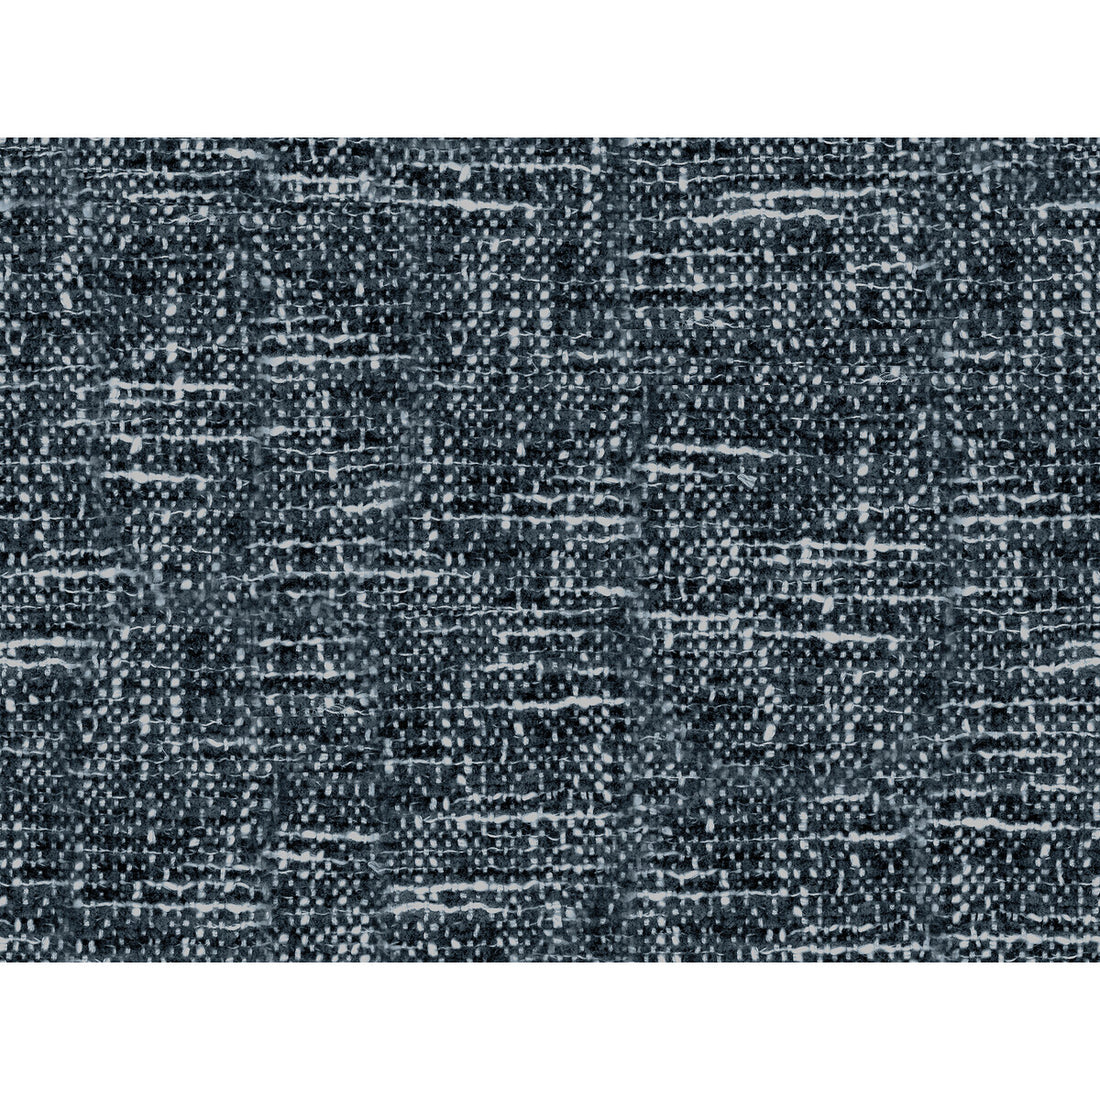 Tinge fabric in sapphire color - pattern GWF-3720.50.0 - by Lee Jofa Modern in the Kelly Wearstler Textures collection